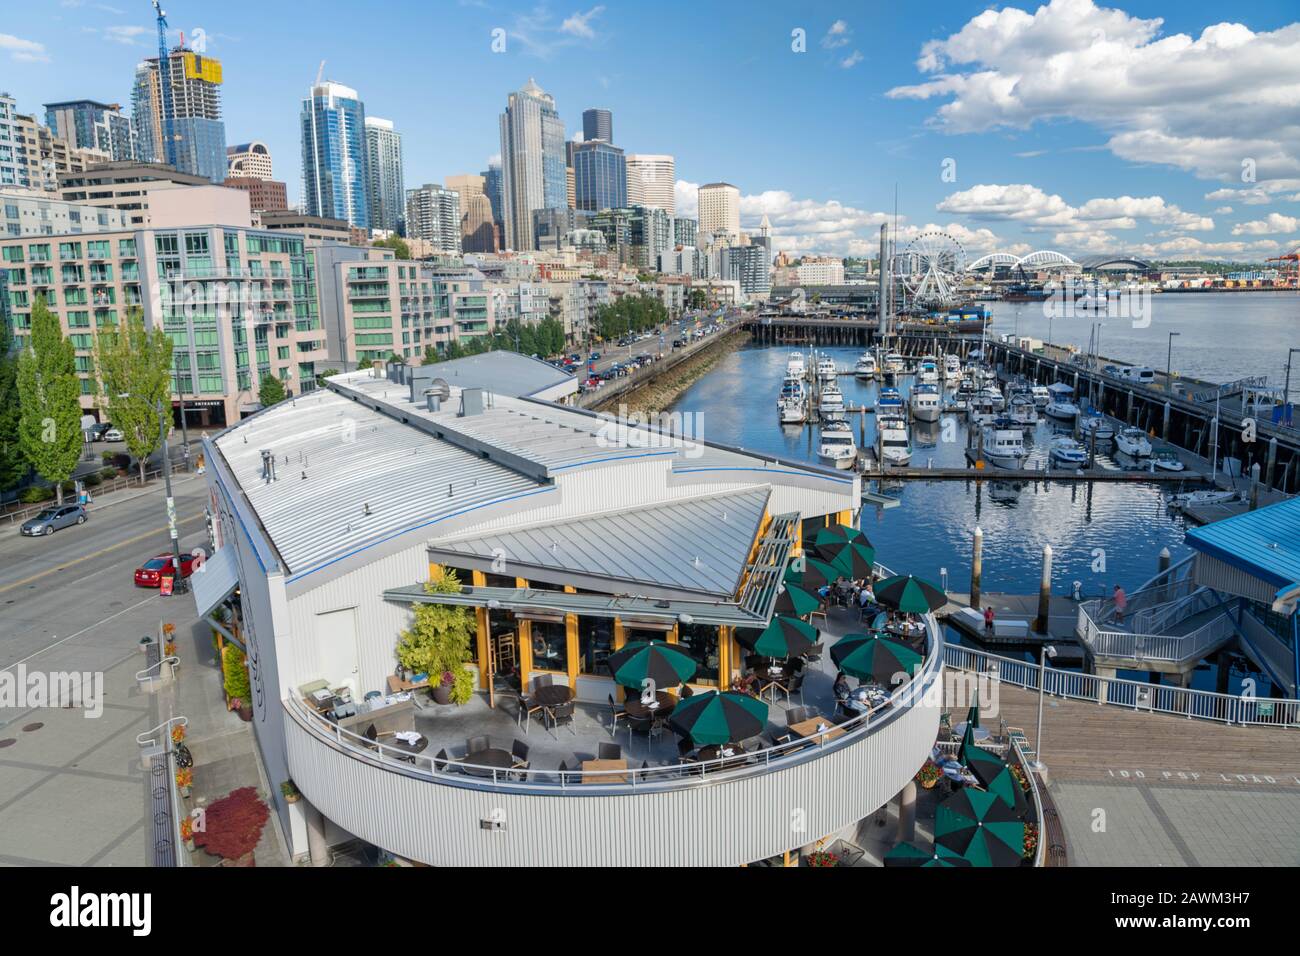 View of Seattle's Belltown district during daytime hours Stock Photo